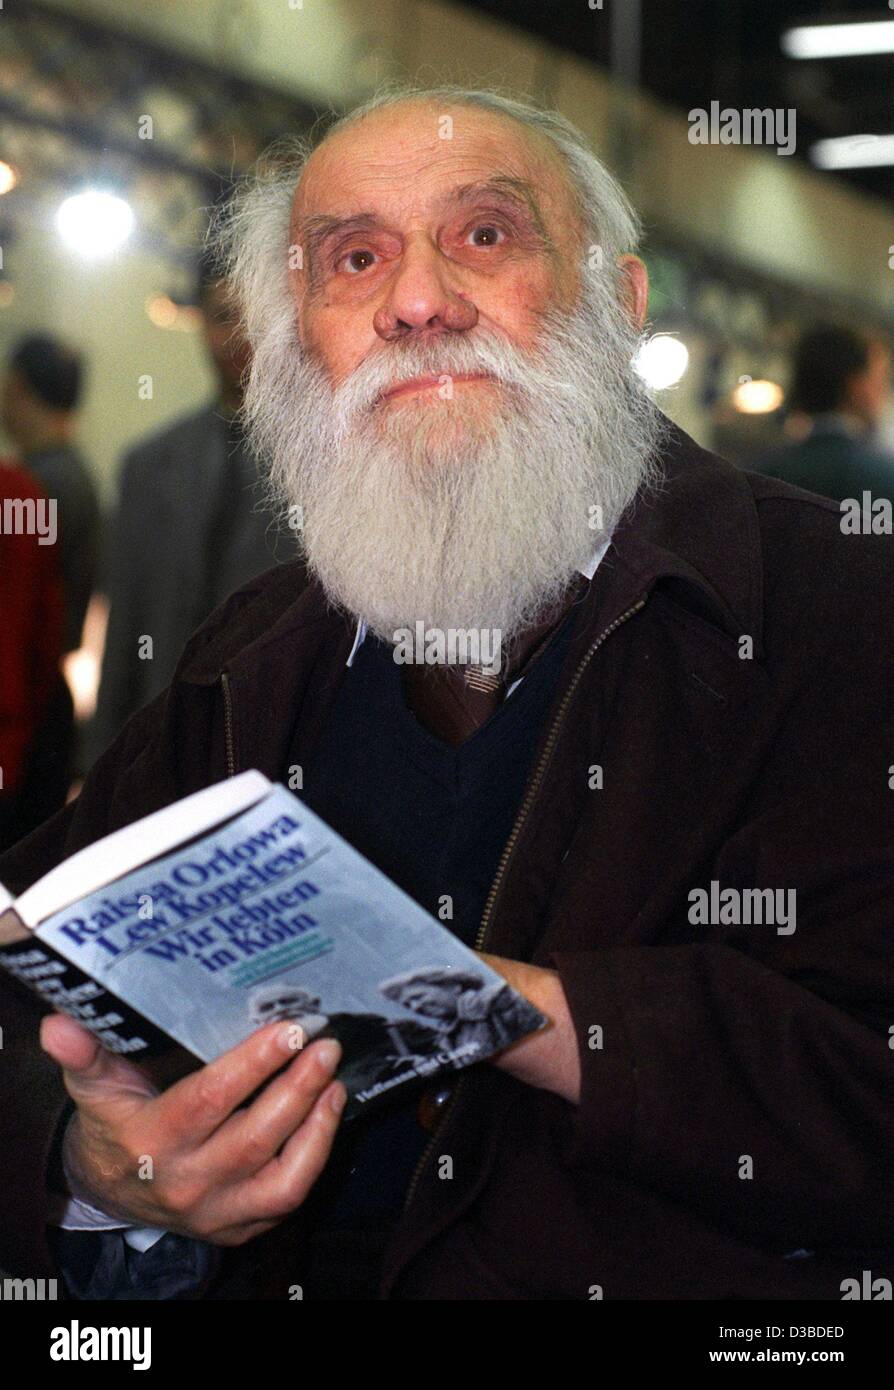 (dpa files) - Russian author and civil rights activist Lev Kopelev at the 48th Book Fair in Frankfurt, 4 October 1996. The dissident author was expatriated from the former Soviet Union in 1981 and has since lived in West Germany. Even after his rehabilitation in 1990 Kopelev decided to stay in Germa Stock Photo